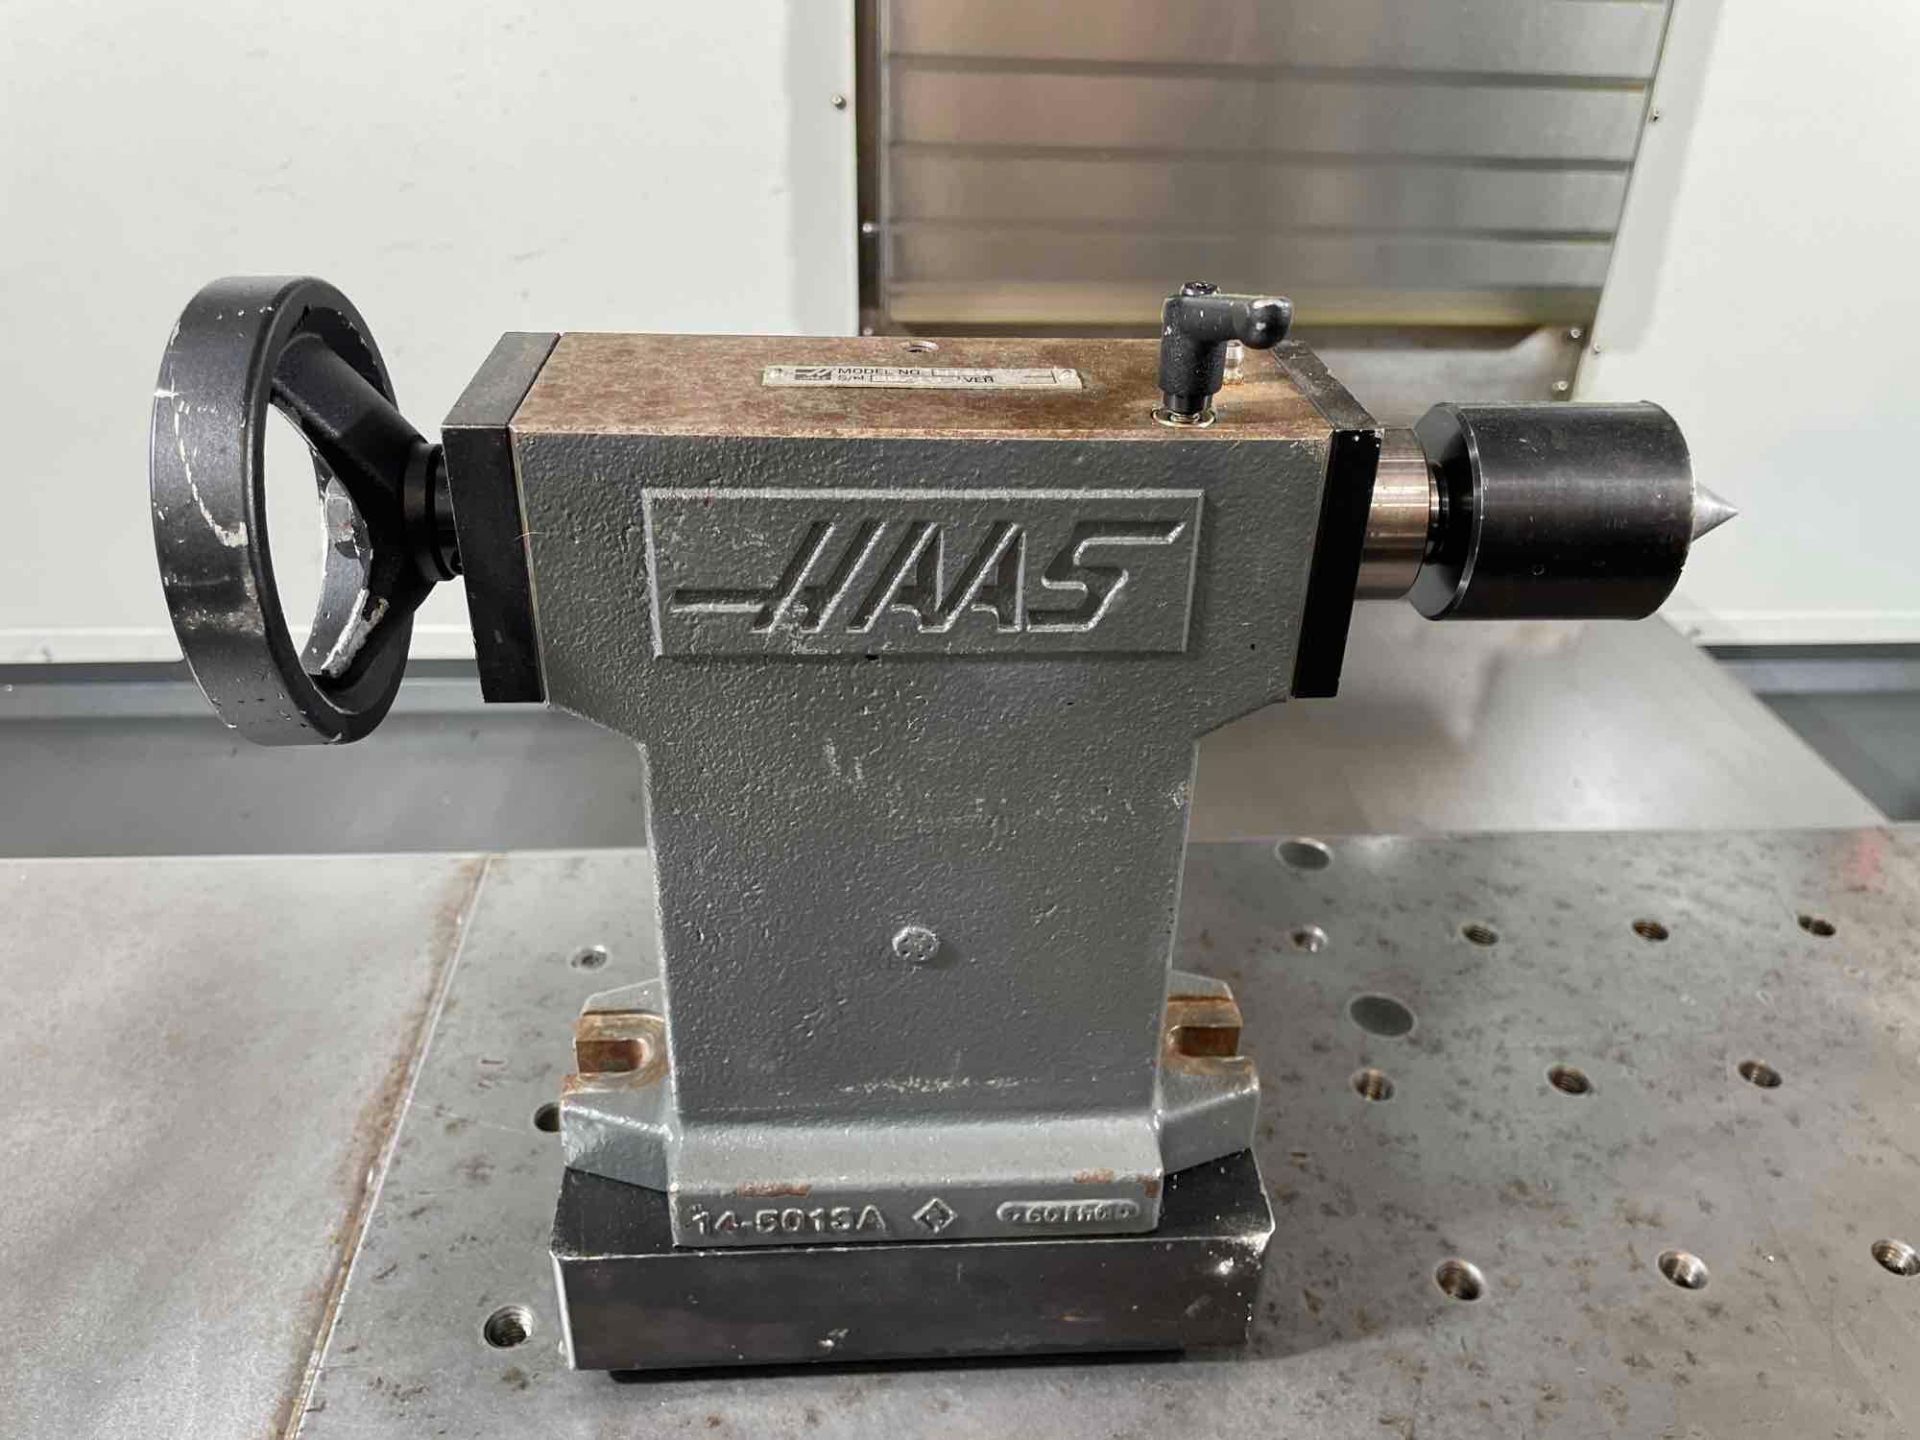 Haas 4th Axis with 10” LMC 3 Jaw Chuck for Haas - Image 4 of 6